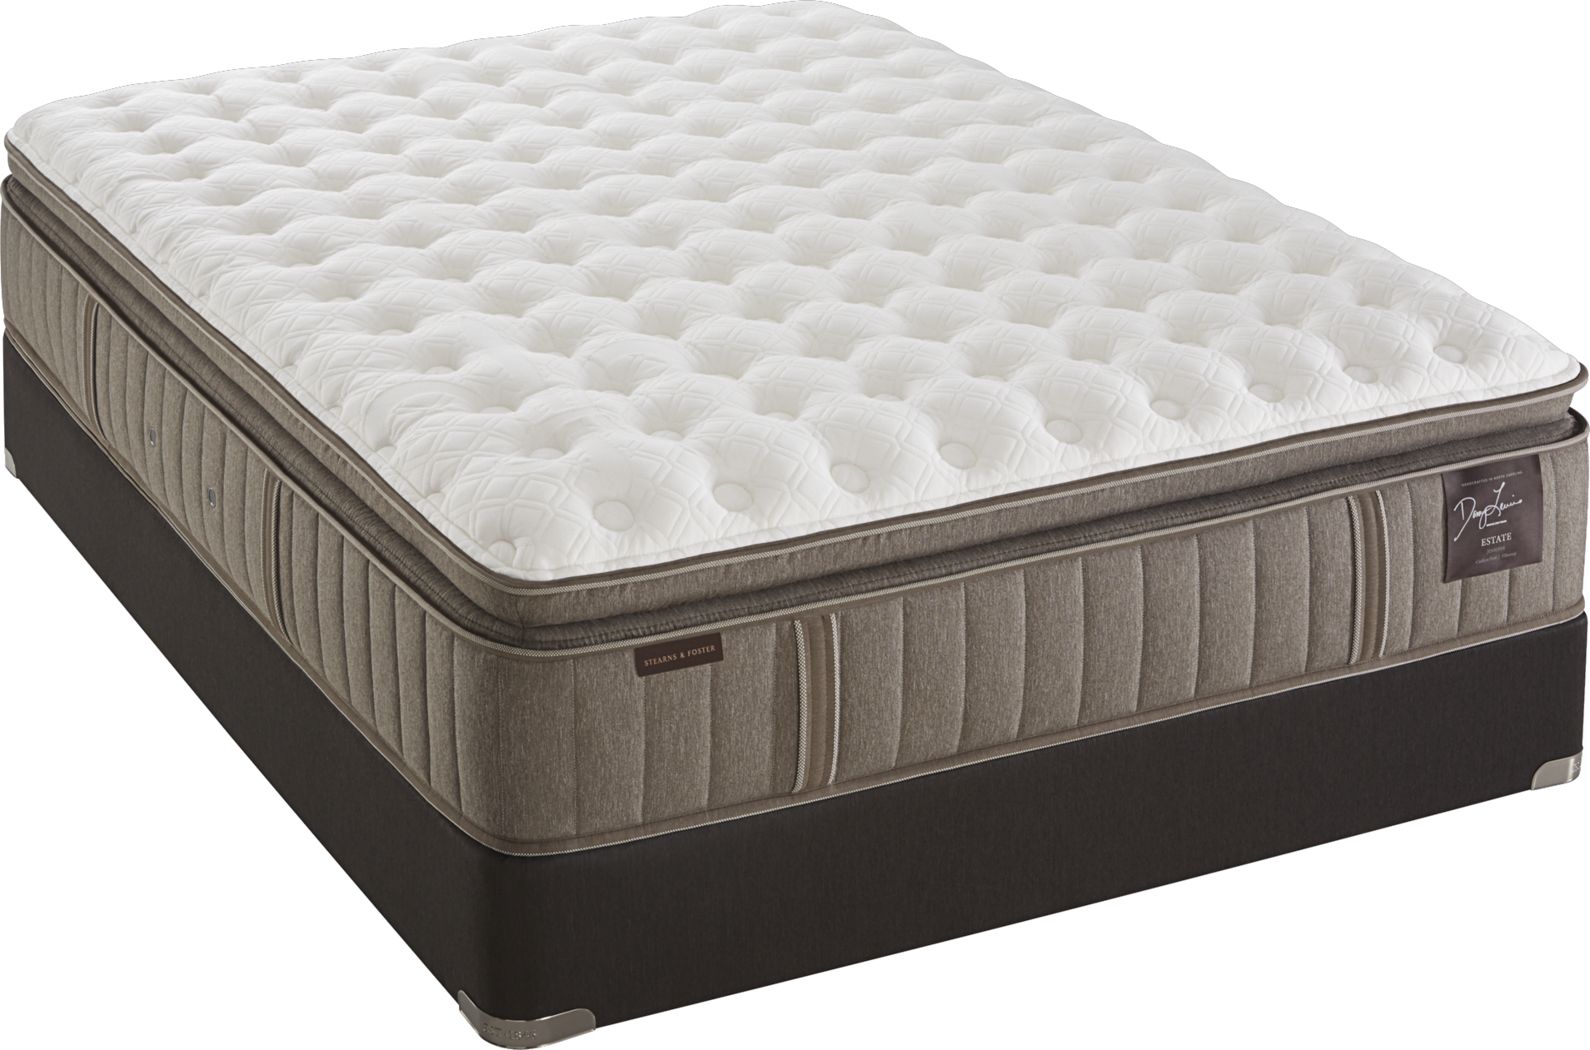 stearns and foster queen mattress sears